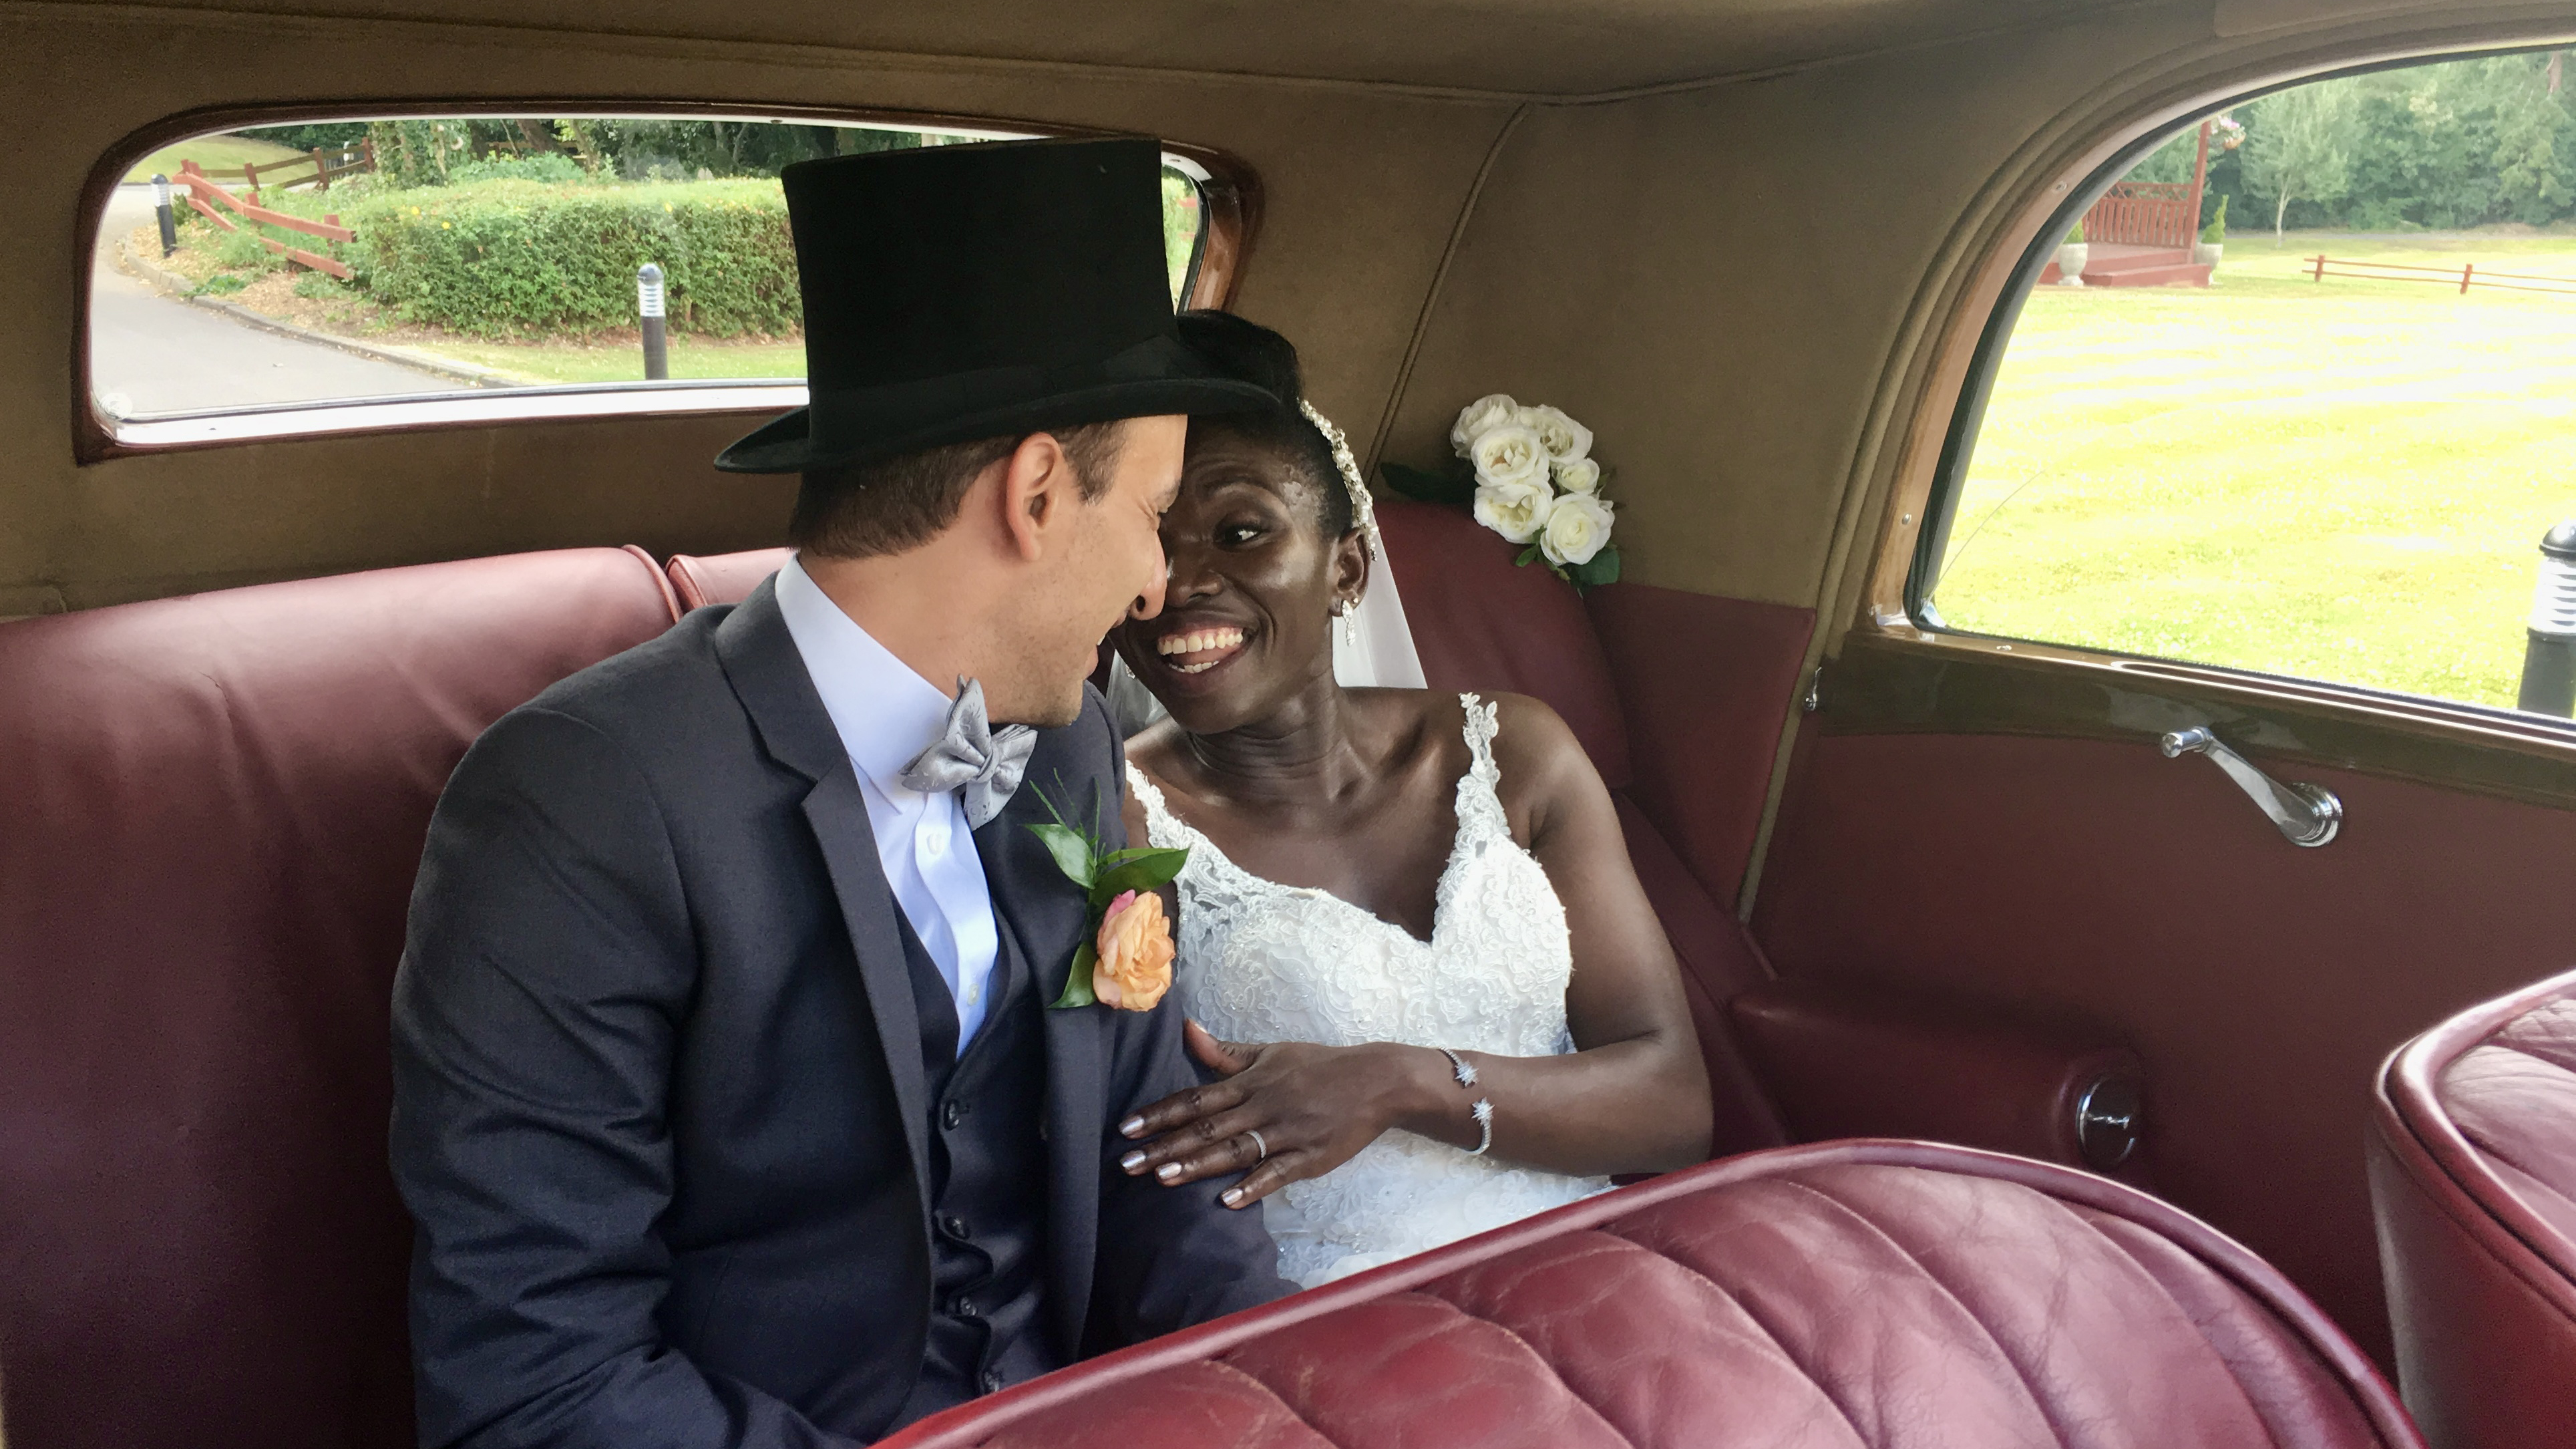 Bride and Groom smiling in the rear seat of vintage car